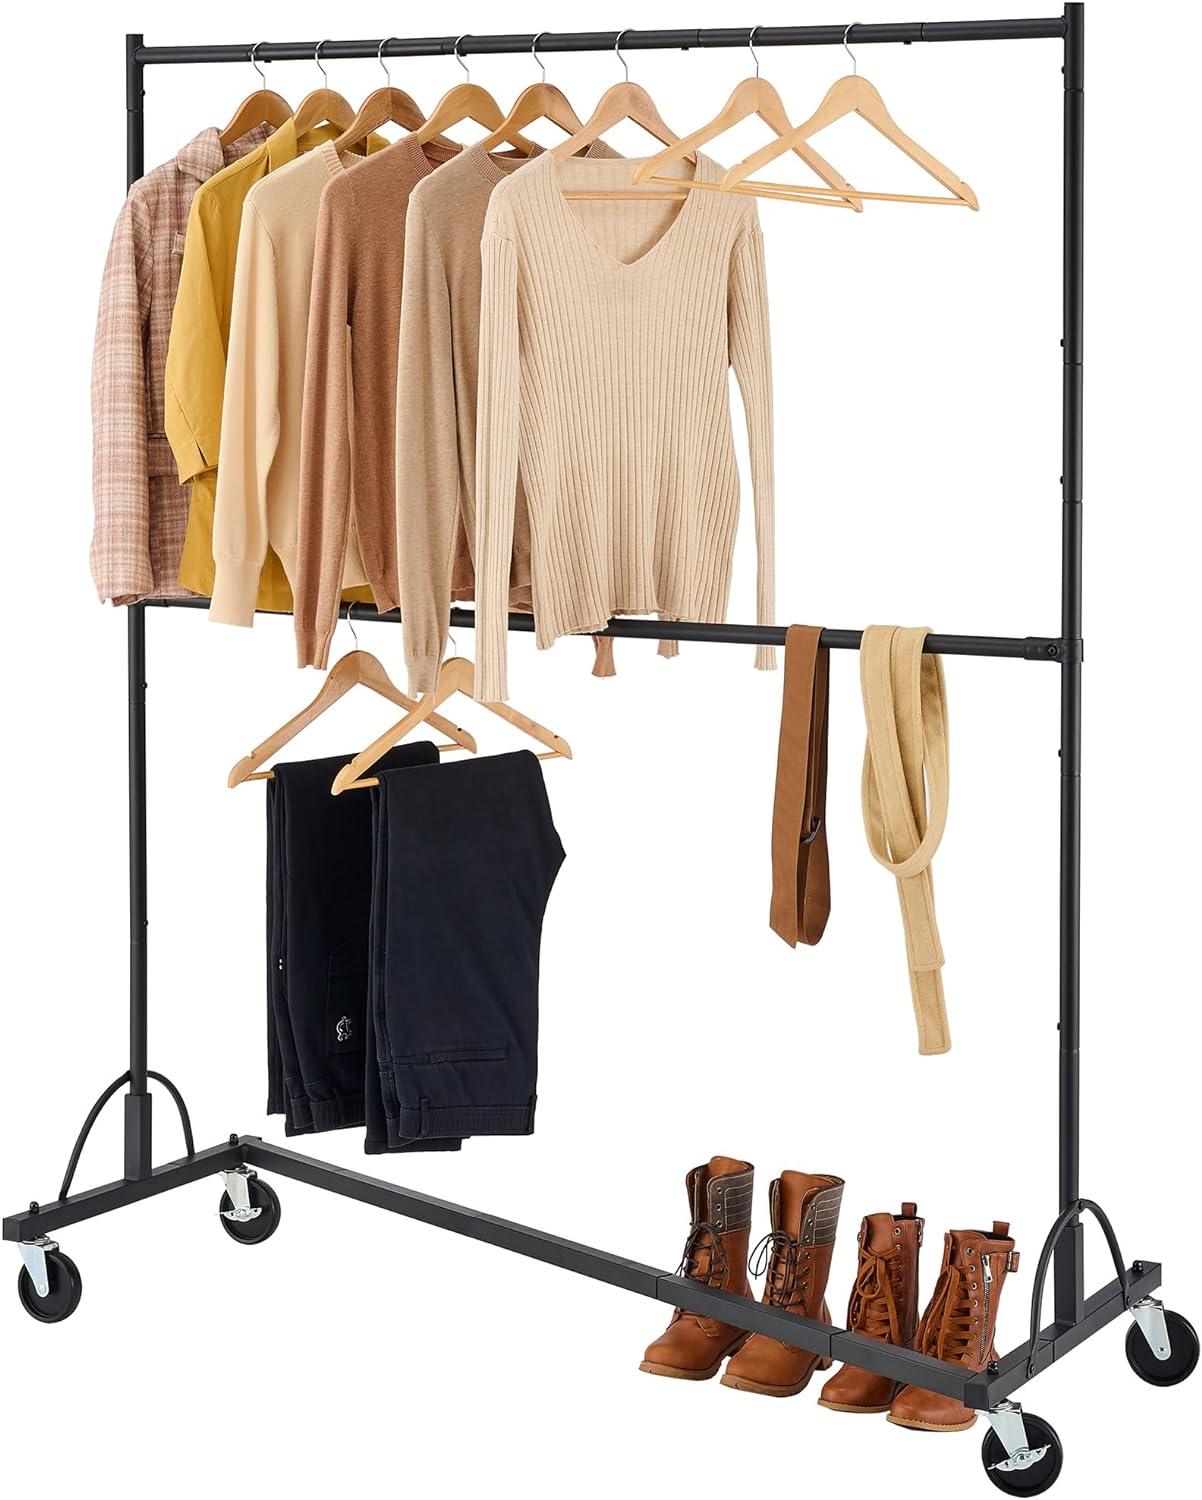 A really excellent rack, strong and durable. Great product holds a lot clothes more than I thought. Very easy to put together and roll around. No hassle in anyway with this.